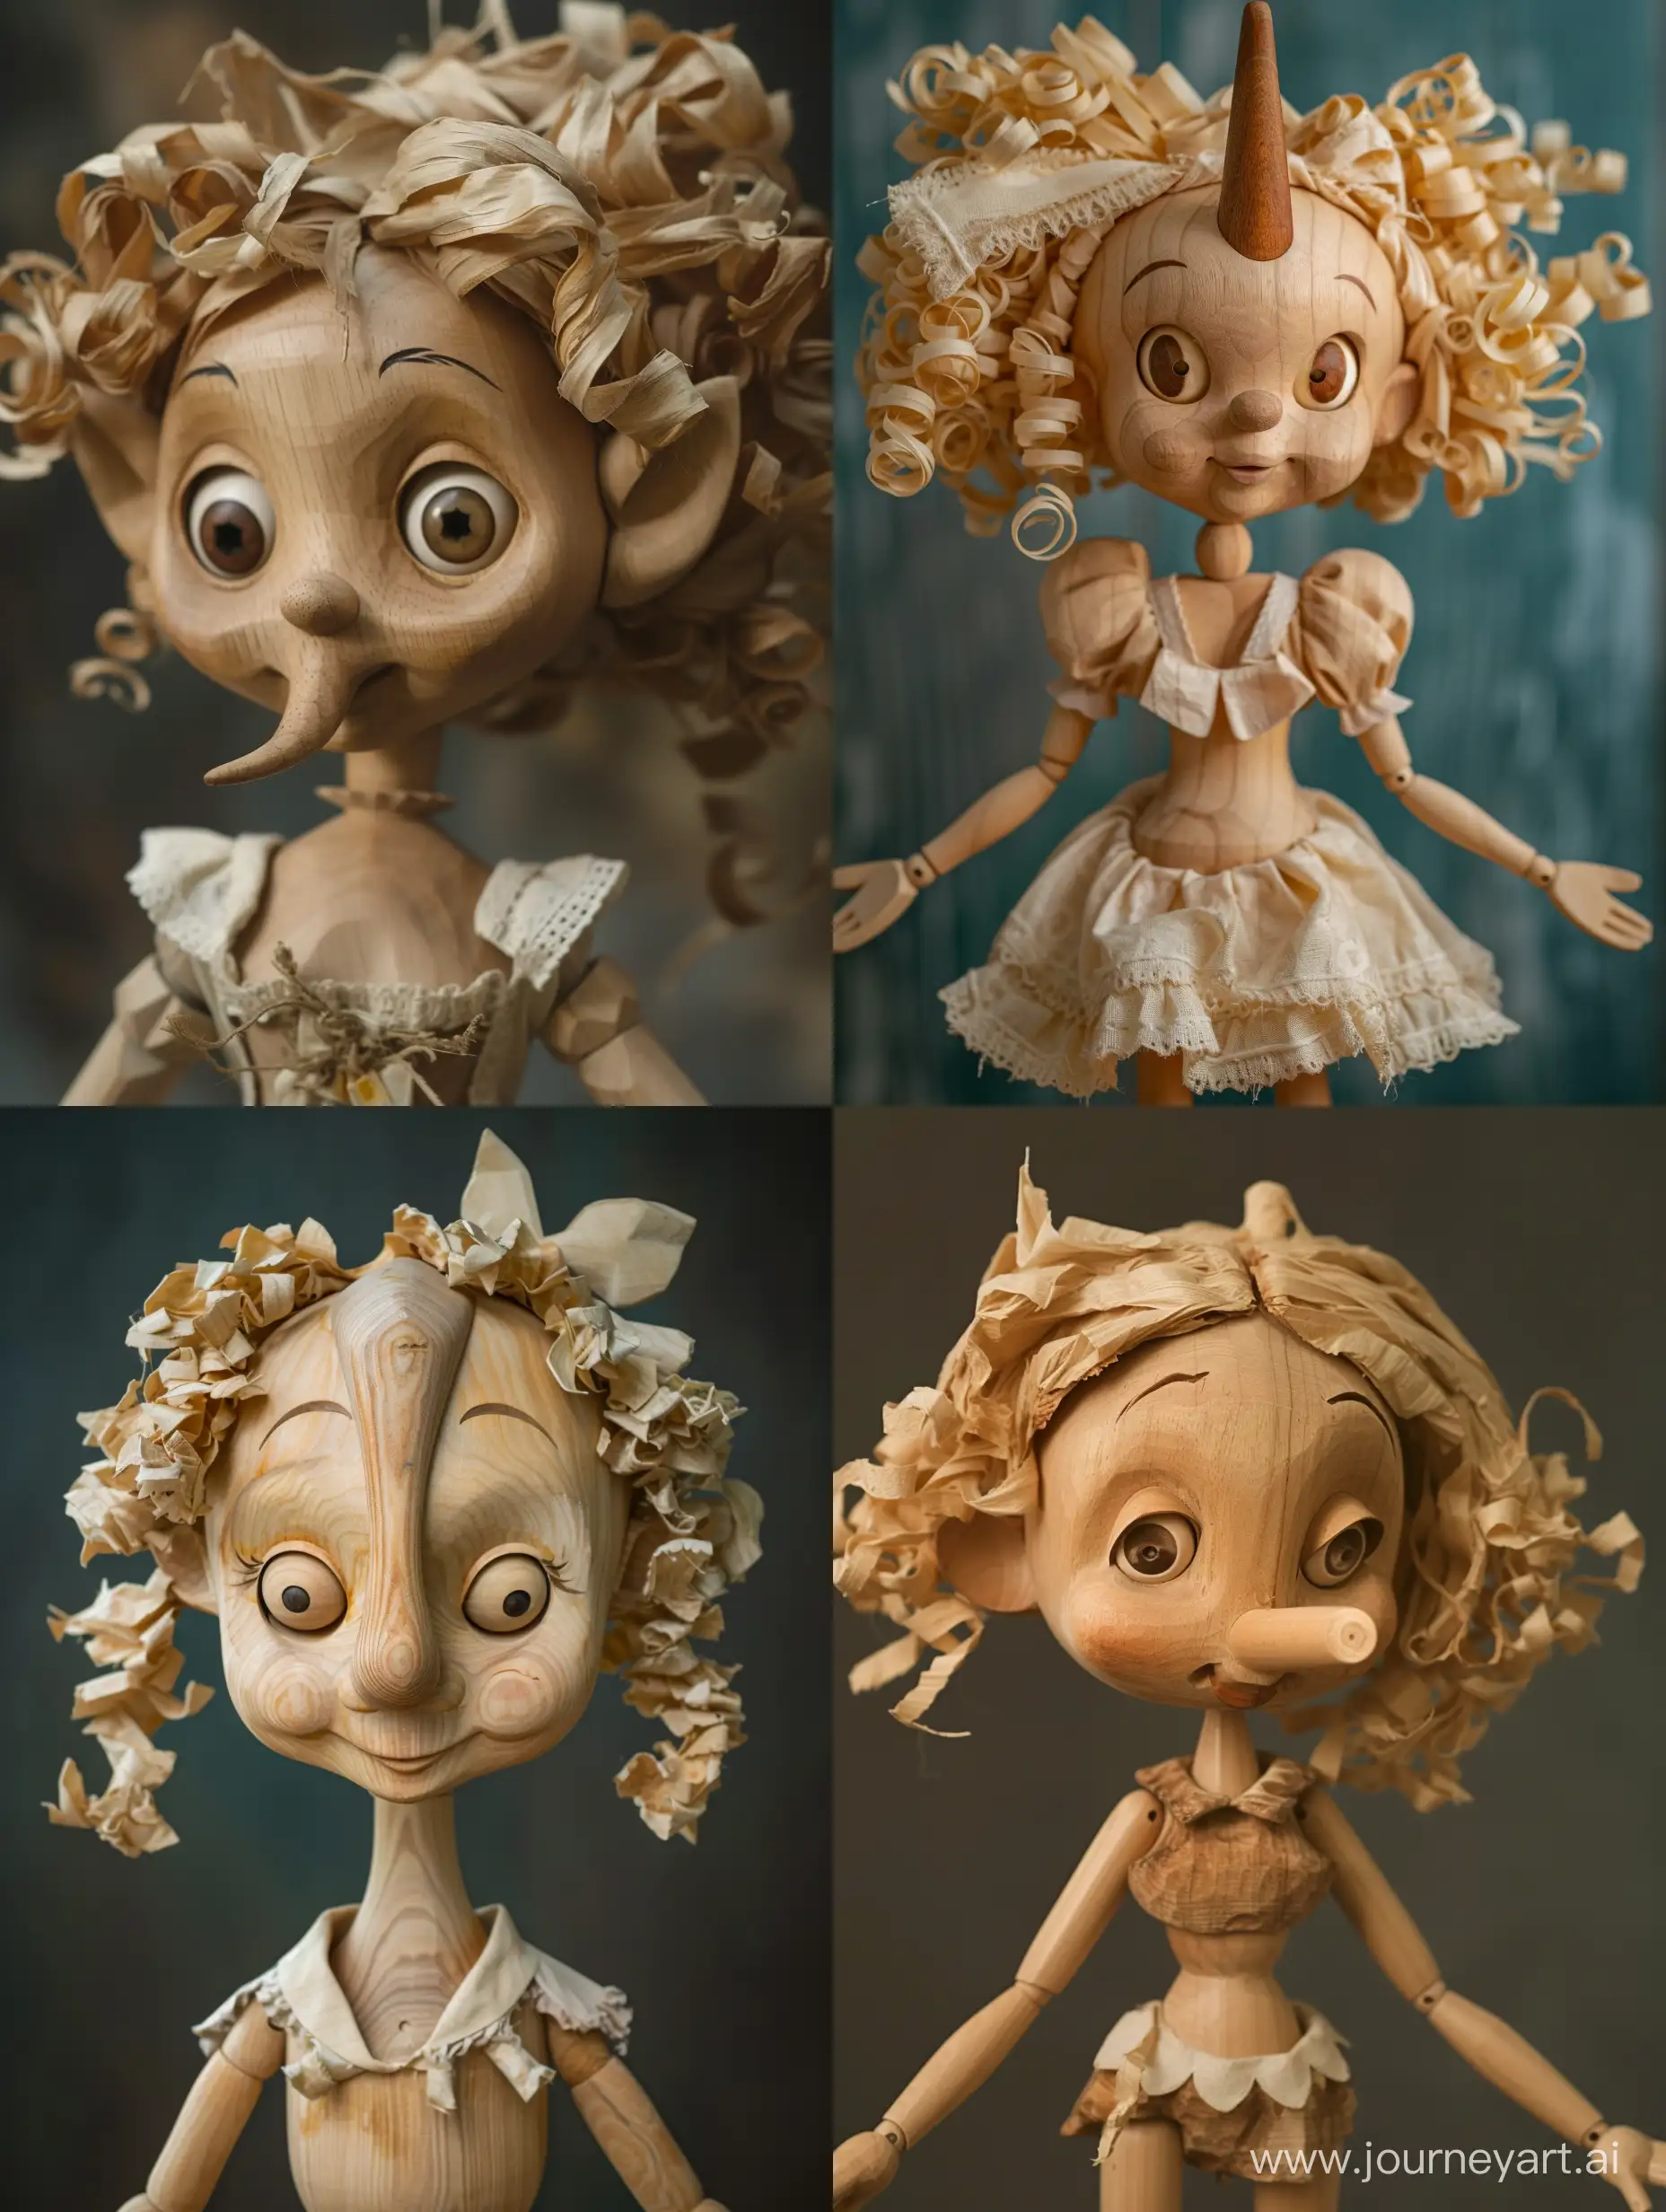 You are a skilled woodworker or craftsman experienced in creating wooden dolls and sculptures. I am seeking your guidance on how to create a wooden Pinocchio doll based on Carlo Collodi's "Le avventure di Pinocchio," specifically depicting Pinocchio as a girl. I want to create a doll that accurately represents Pinocchio's character while incorporating feminine attributes. Please provide guidance on how to create a wooden Pinocchio doll with a long wooden nose, curly hair made of wood shavings, small breasts, and open eyes. It would be helpful if you could suggest techniques and materials for sculpting and carving the doll to achieve the desired features and details. Please provide a step-by-step guide or list, including examples or scenarios of different techniques and materials that can be used. Additionally, any tips or suggestions for achieving realistic and detailed features would be greatly appreciated.